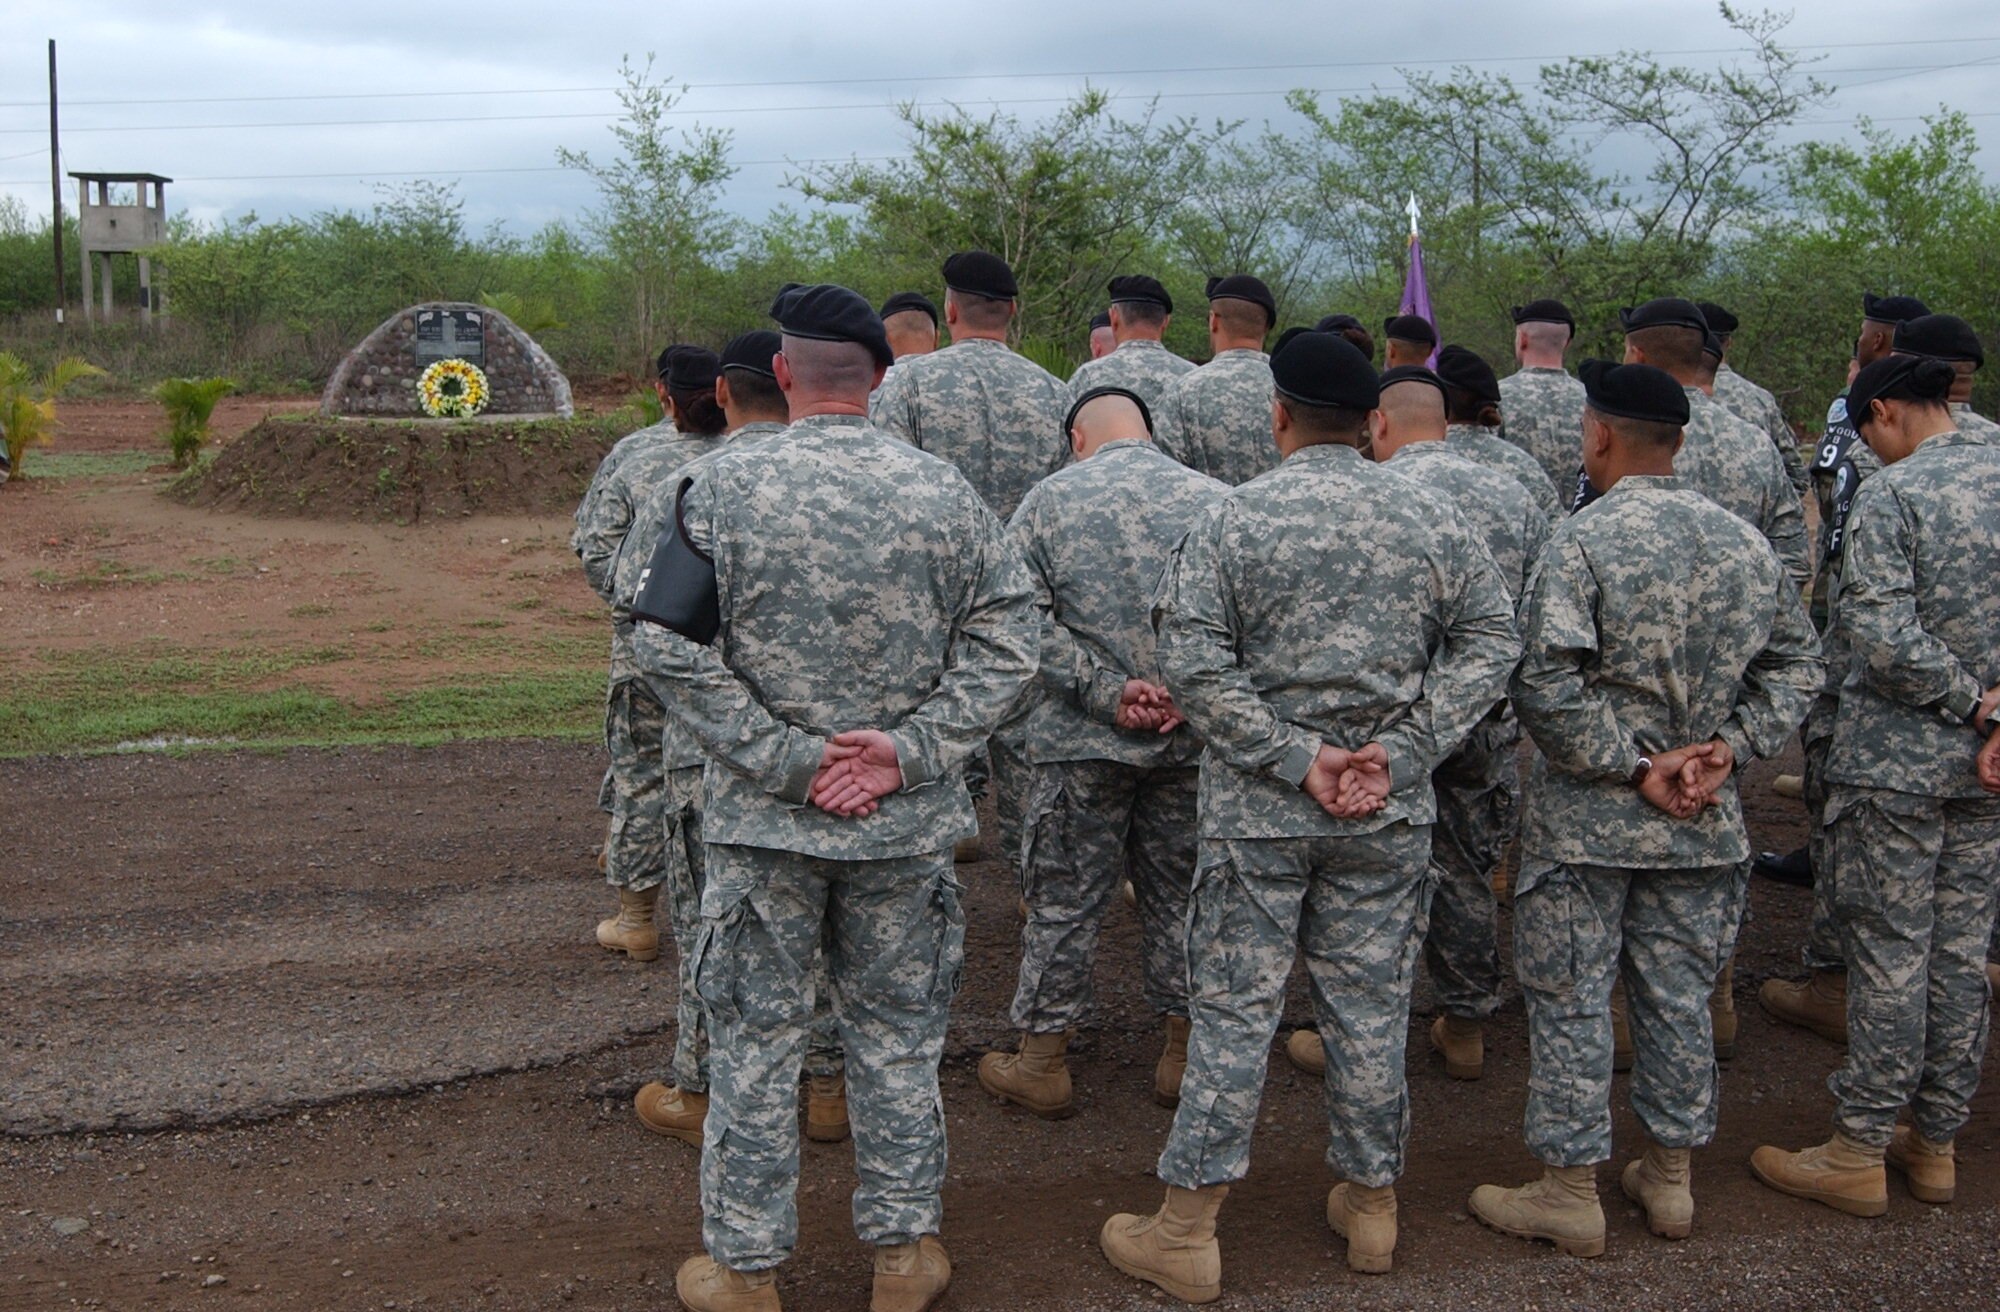 SOTO CANO AIR BASE, Honduras – Soldiers and Airmen from Joint Security Forces pause for a moment of silence during the memorial service for Army Staff Sgt. Randall J. Harris, who died from wounds suffered in the line of duty here on June 13, 1987.  Each year, Joint Task Force-Bravo holds a memorial service in remembrance of Sergeant Harris.   (U.S. Air Force photo/Tech. Sgt. Sonny Cohrs)